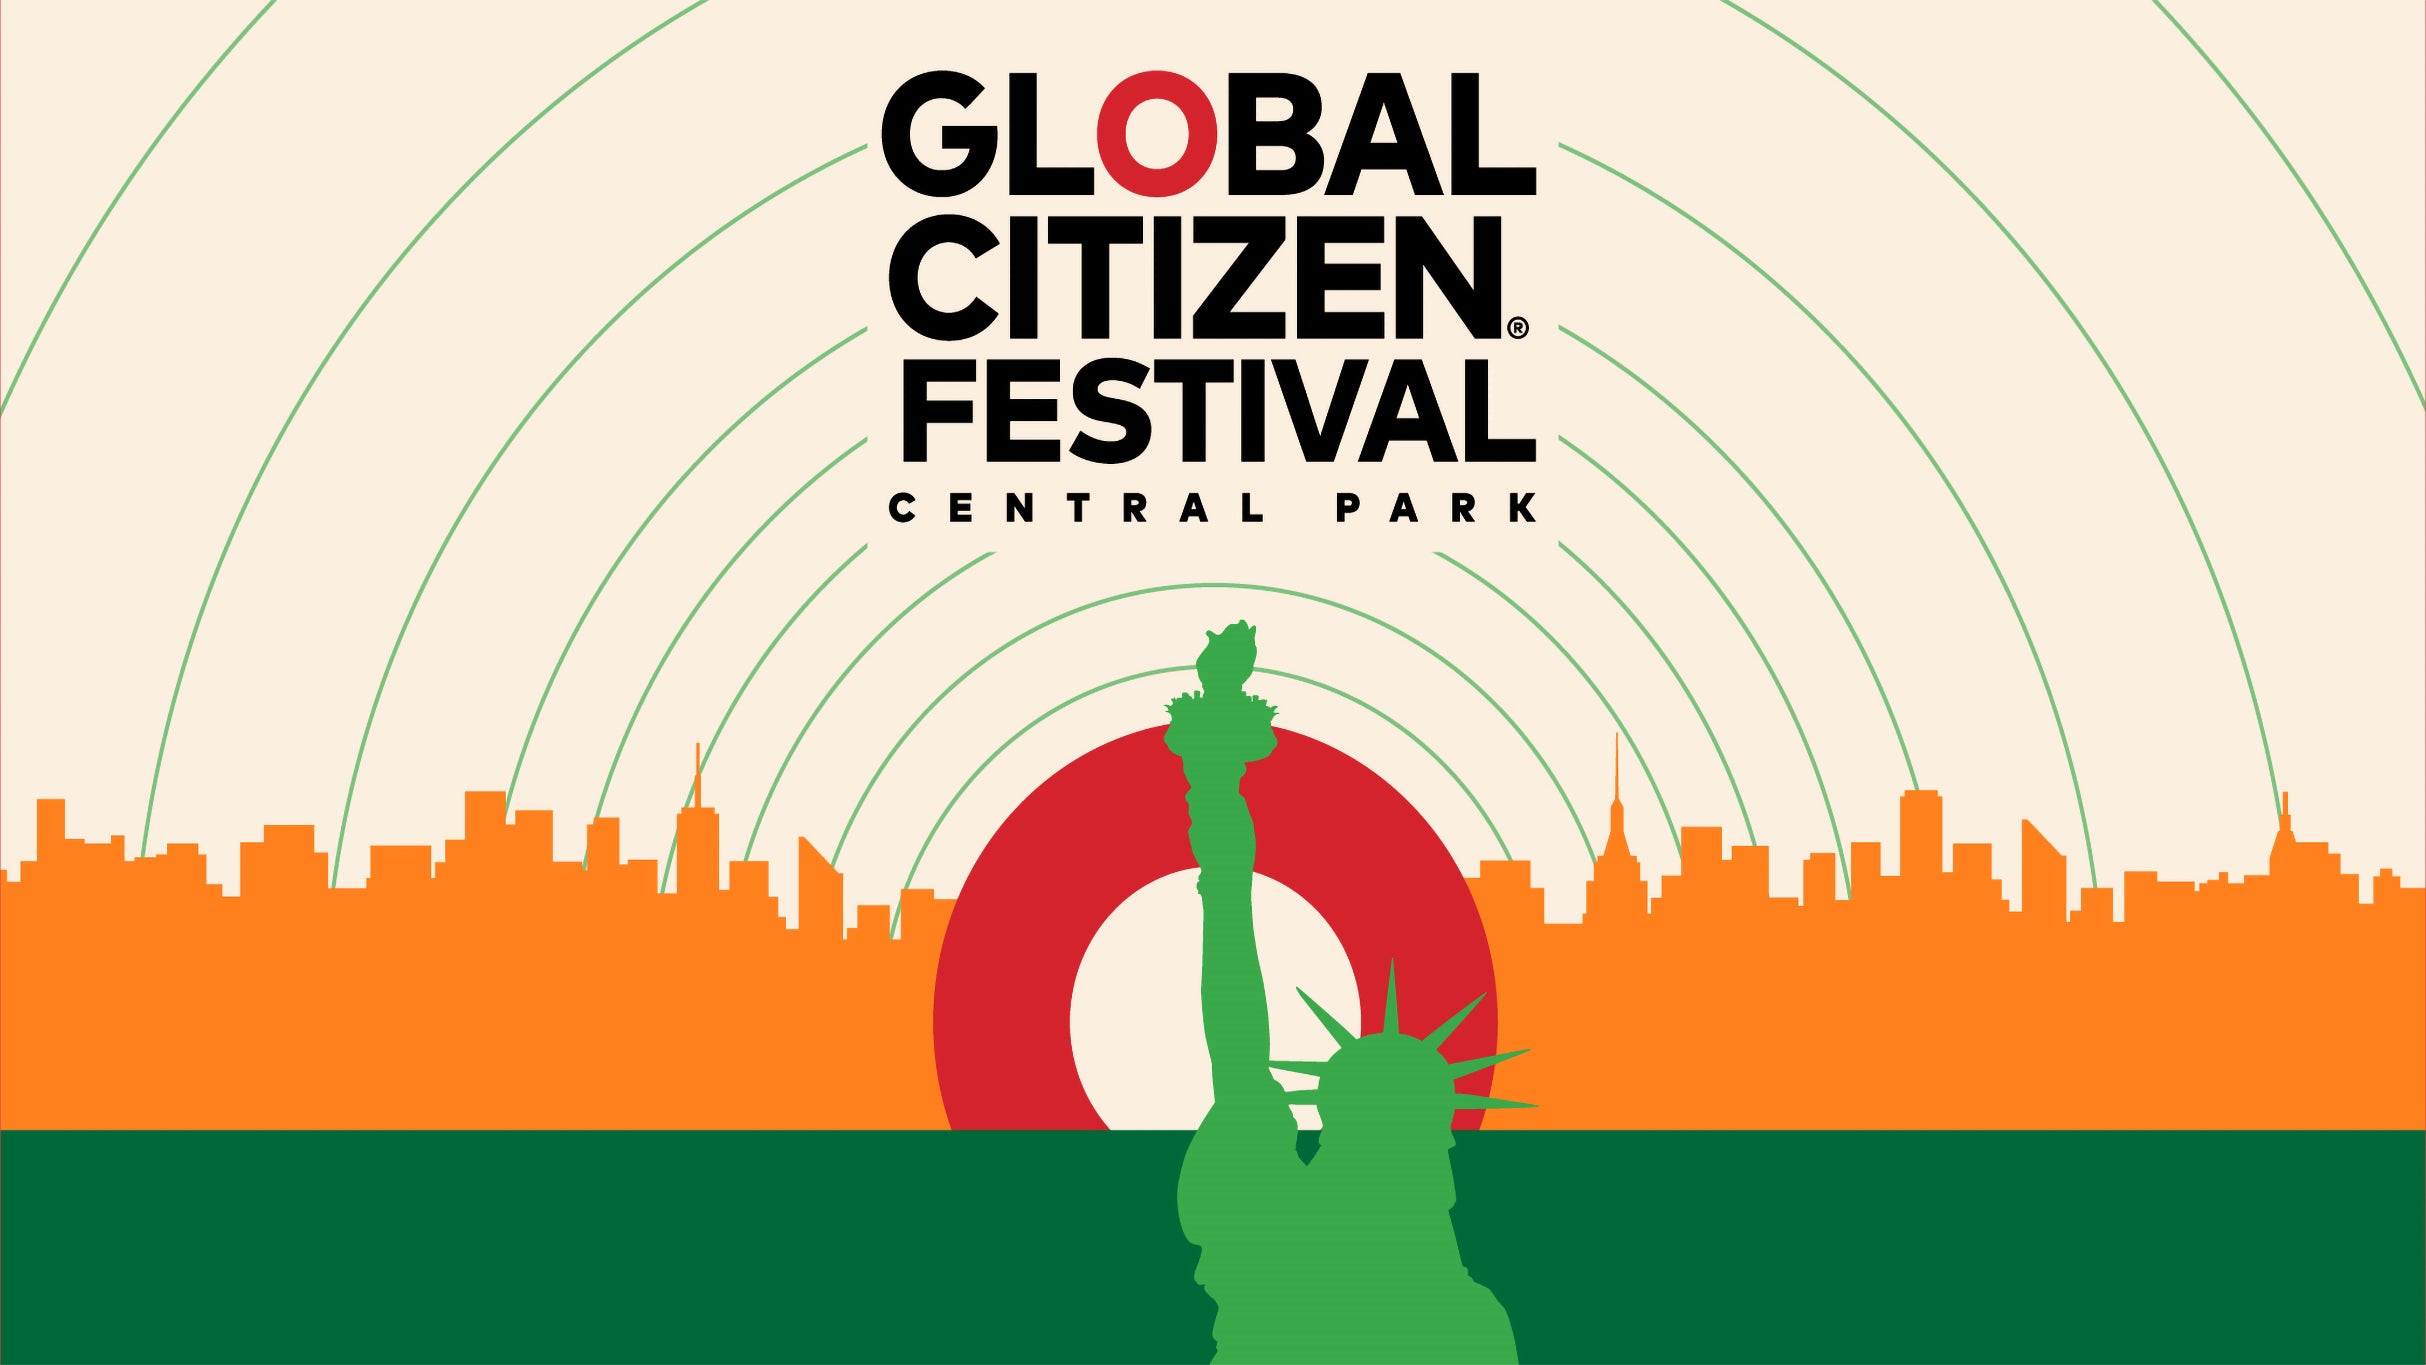 Global Citizen Festival at Great Lawn at Central Park on Sep 24, 2022